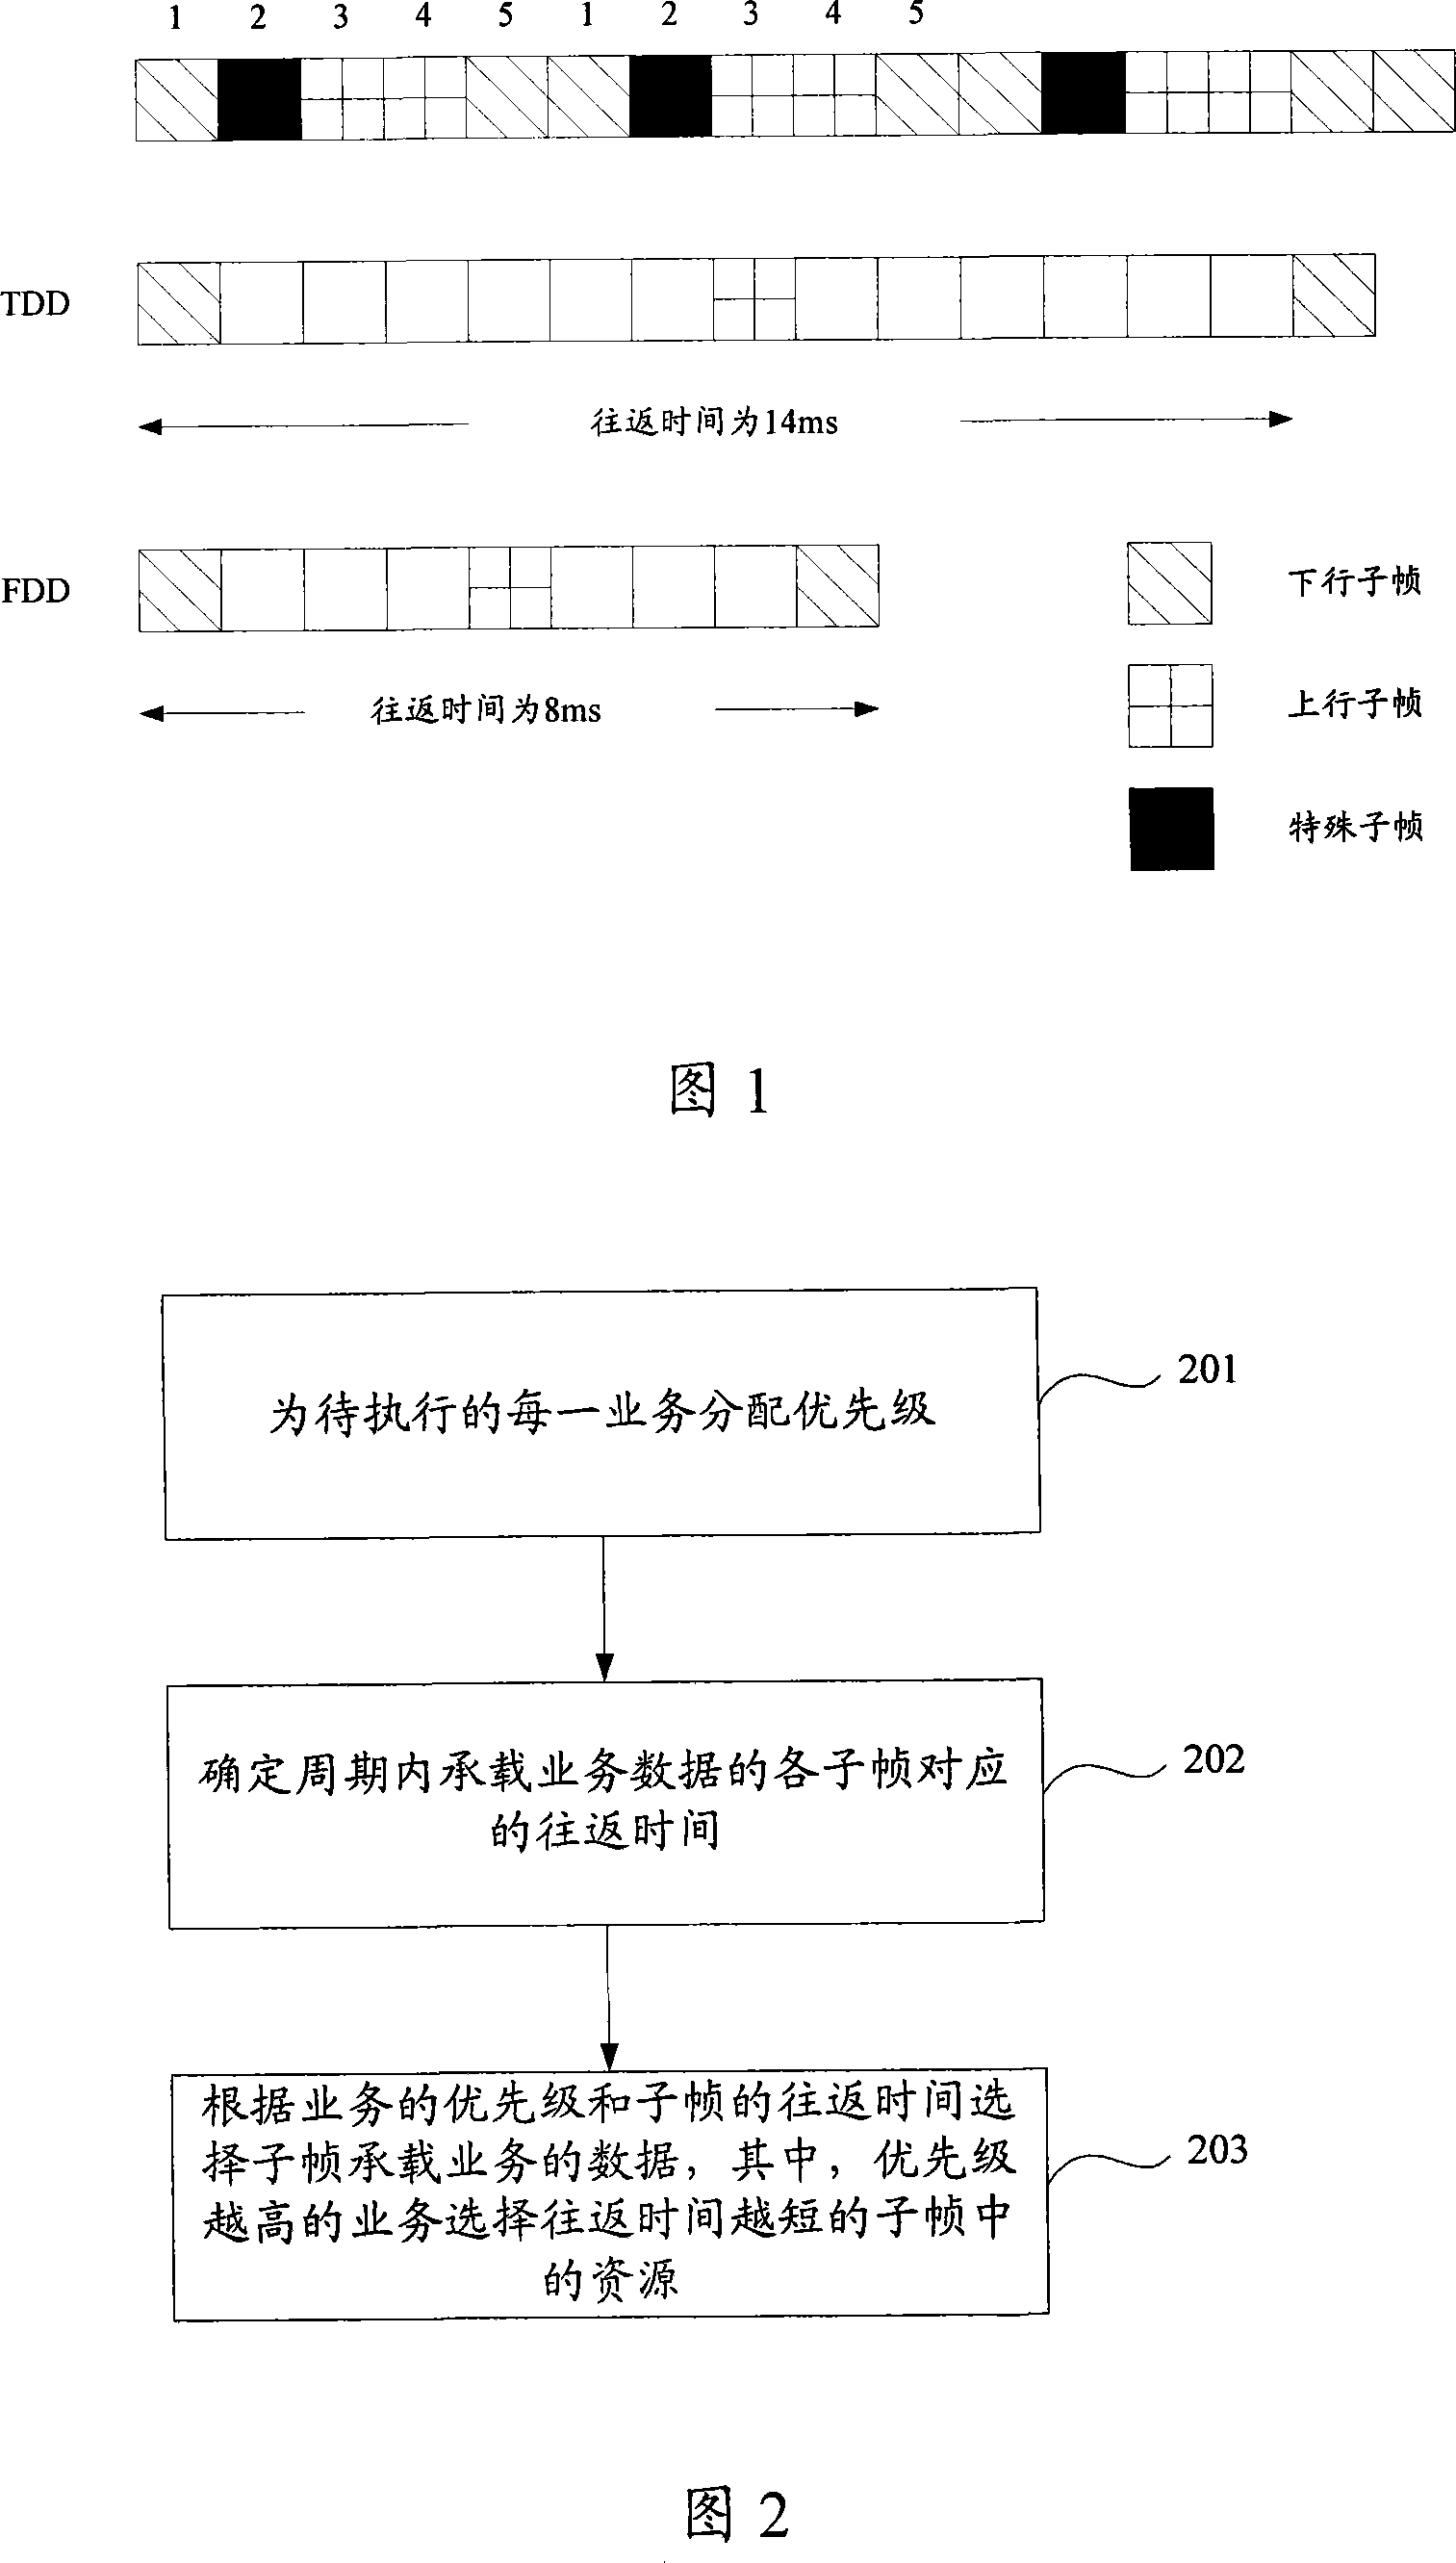 Resource scheduling method, device and a communication system